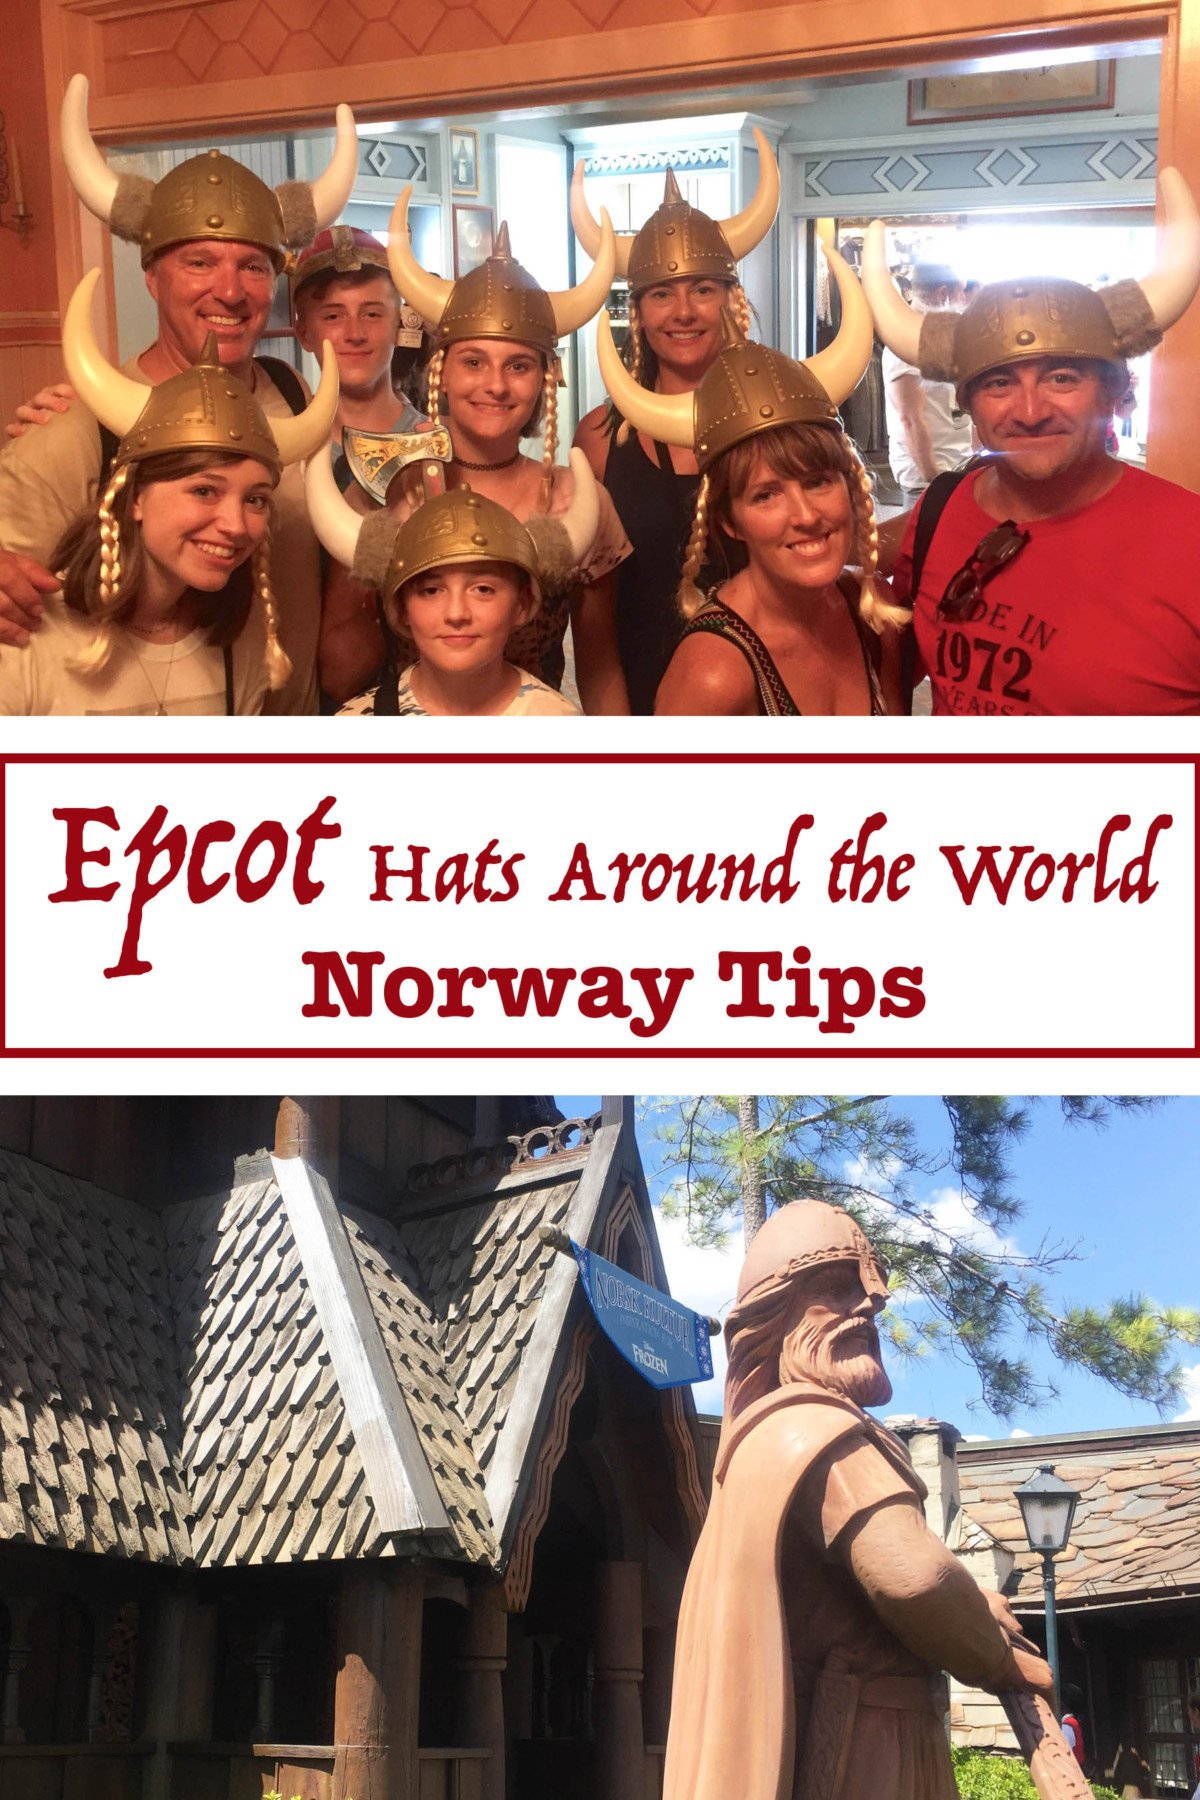 Epcot hats around the world norway tips